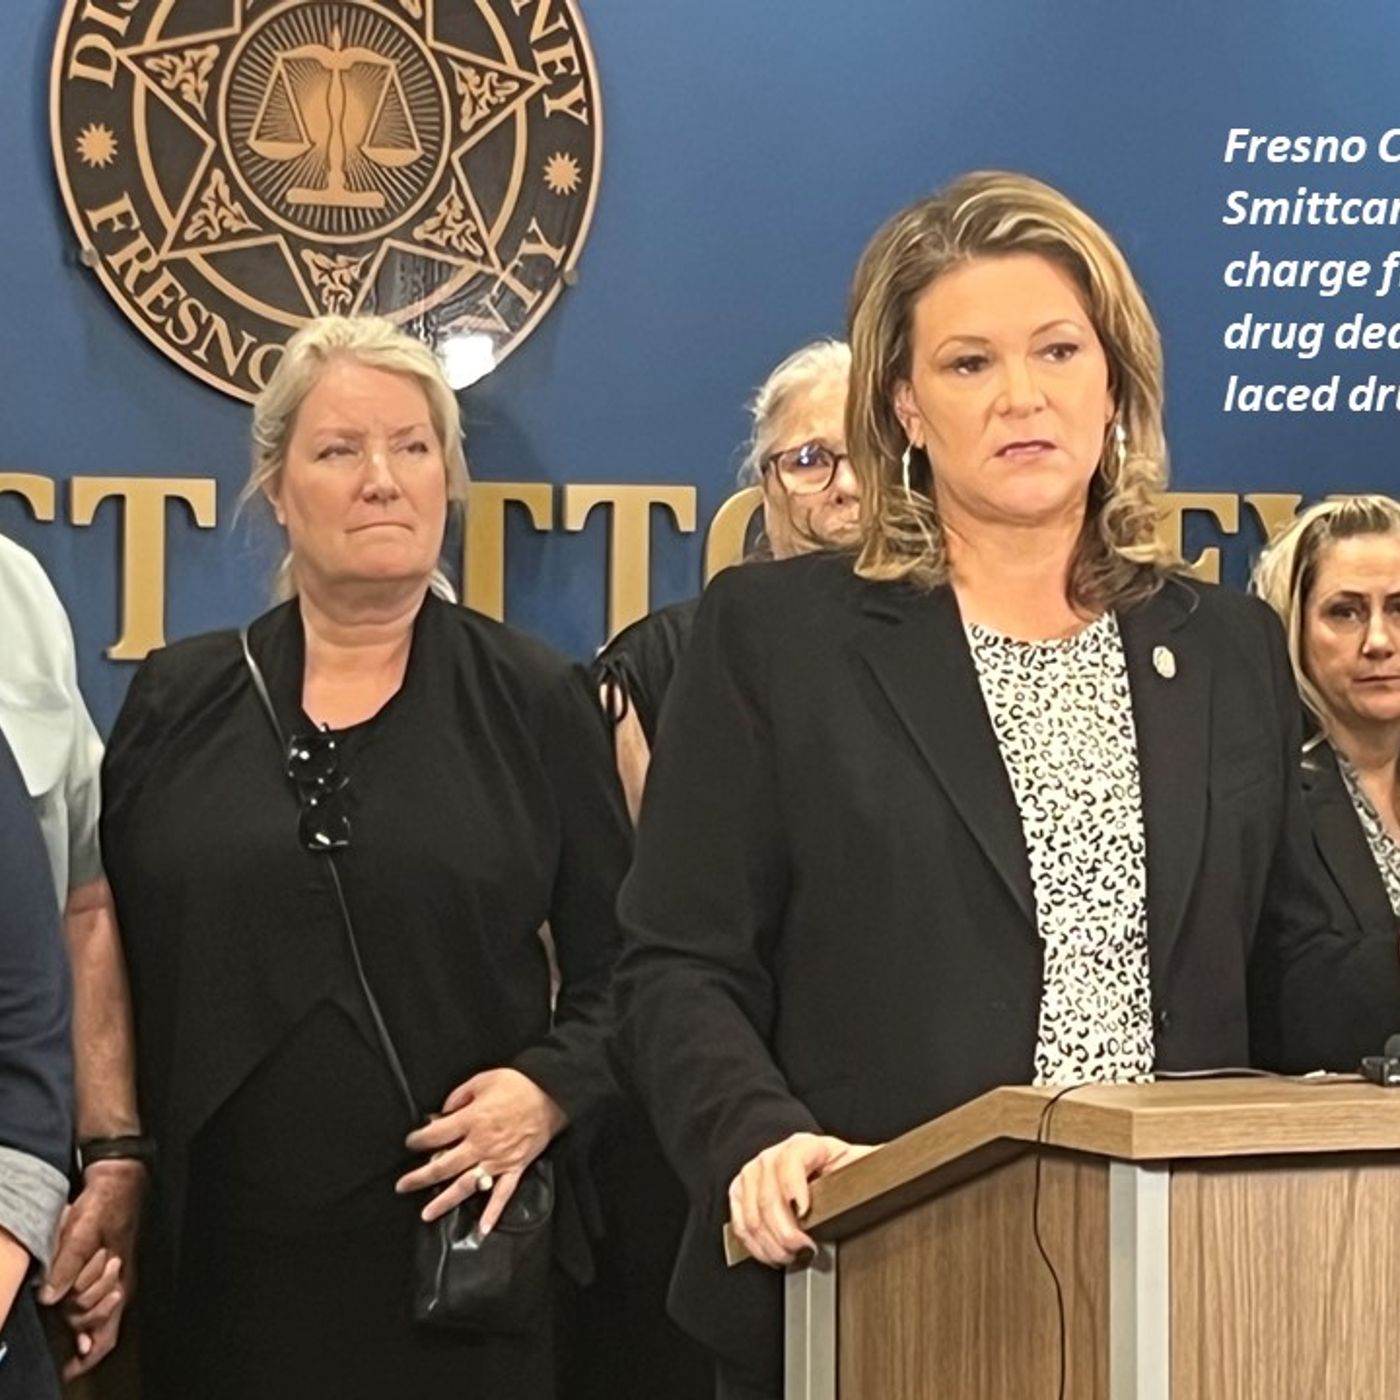 Attorney General Bonta, law enforcement statewide and DA Smittcamp tackle fentanyl crisis head on